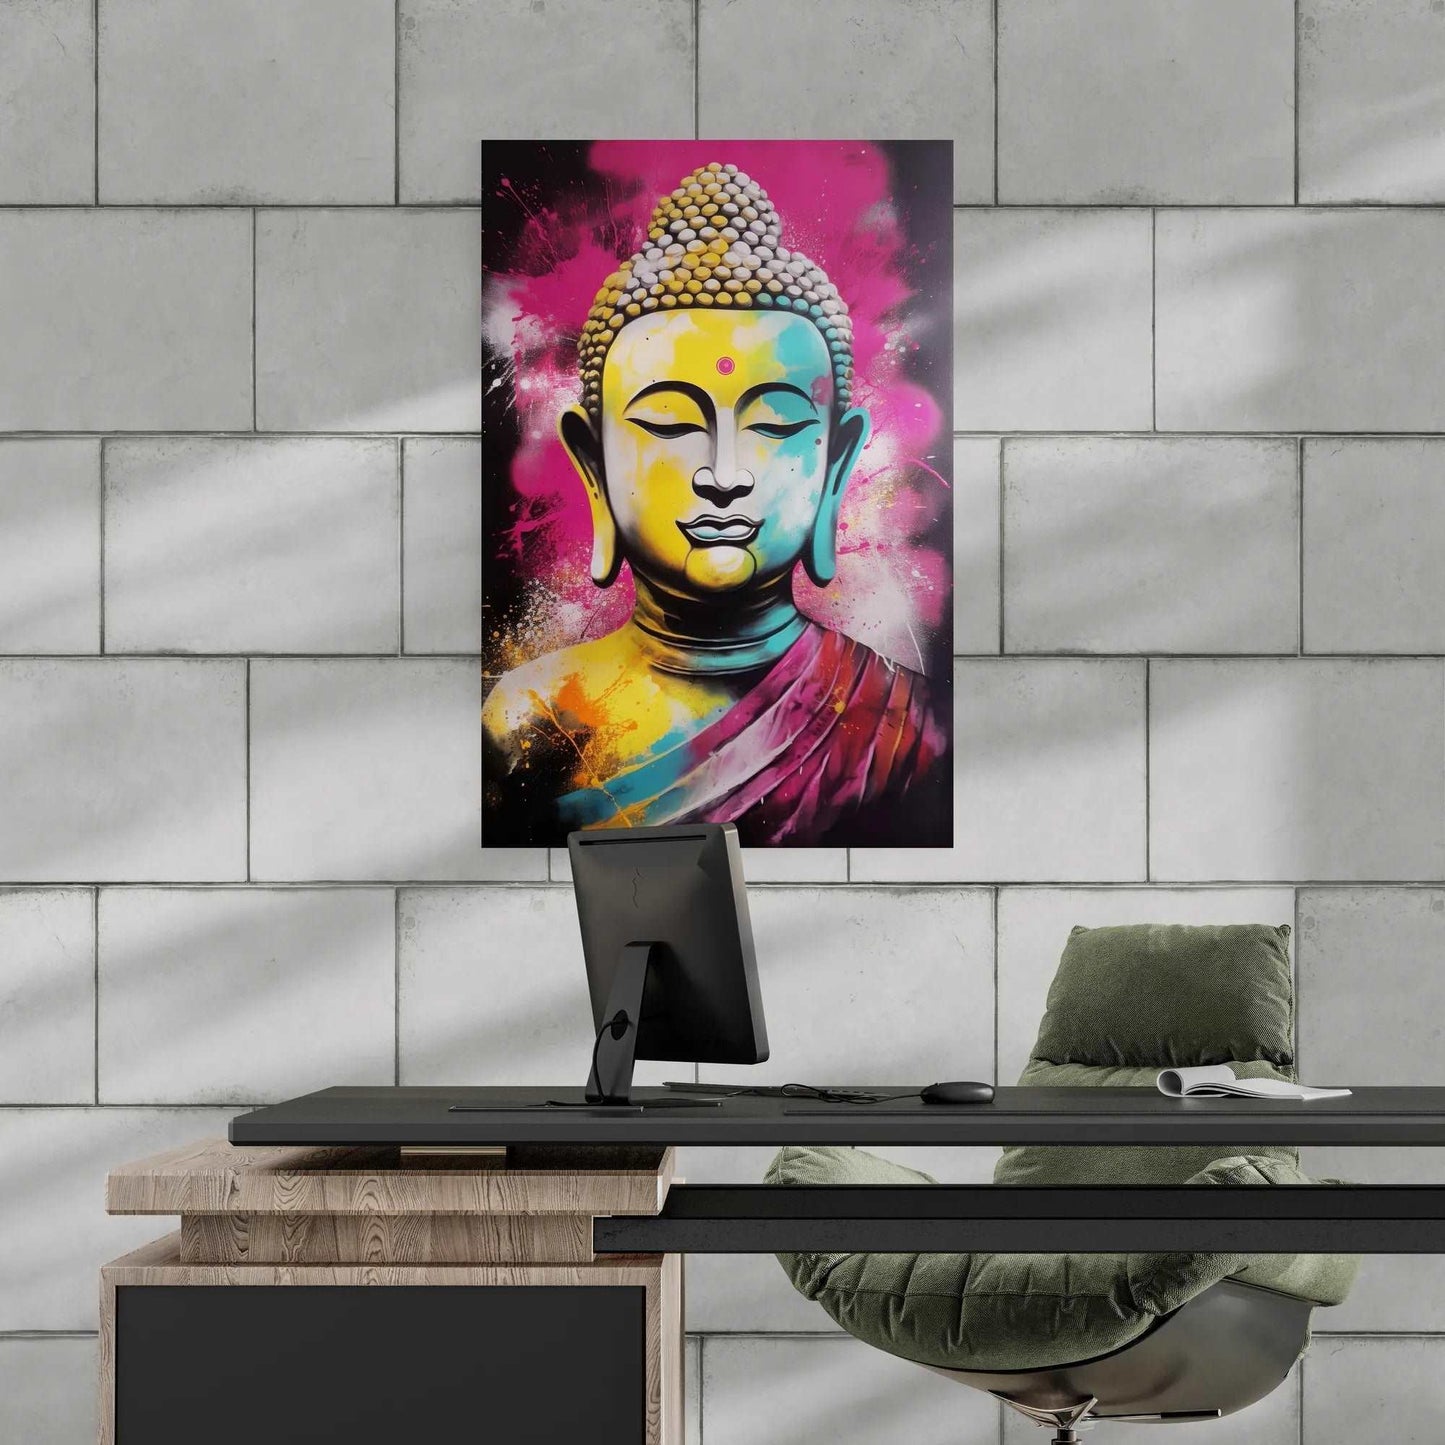 Modern workspace featuring a vibrant Buddha painting on a white brick wall, adding an inspiring and artistic touch to a minimalist office setup with a green chair.